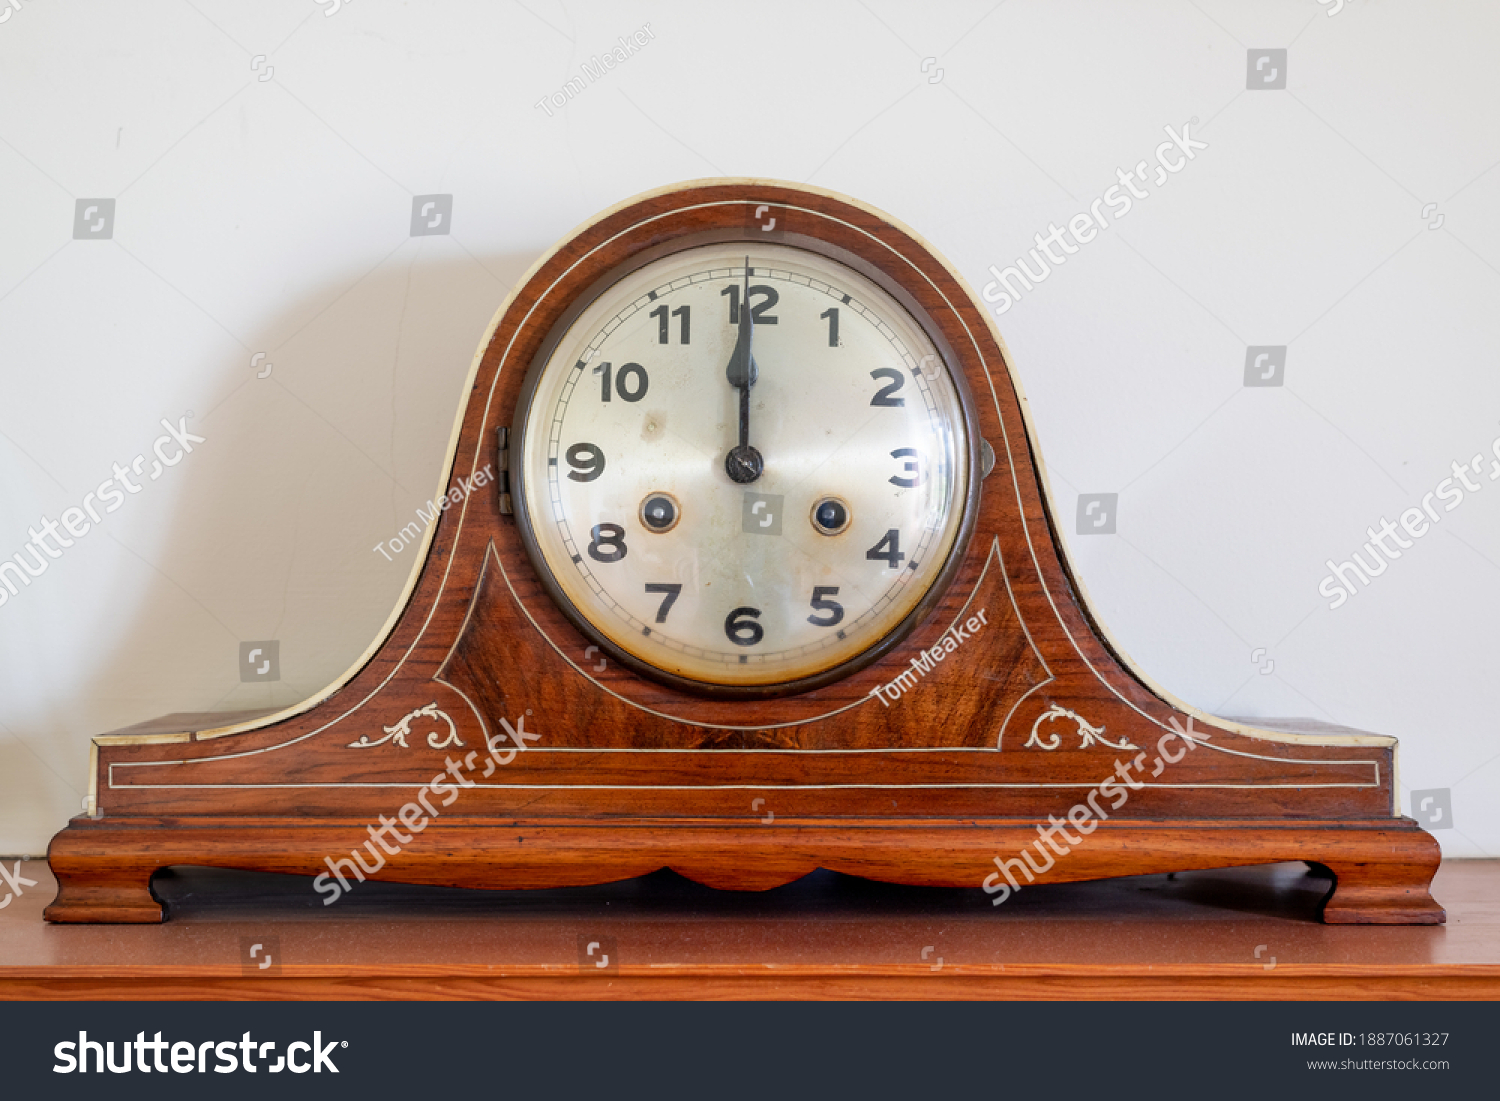 Close up of an antique clock showing 12 oclock #1887061327